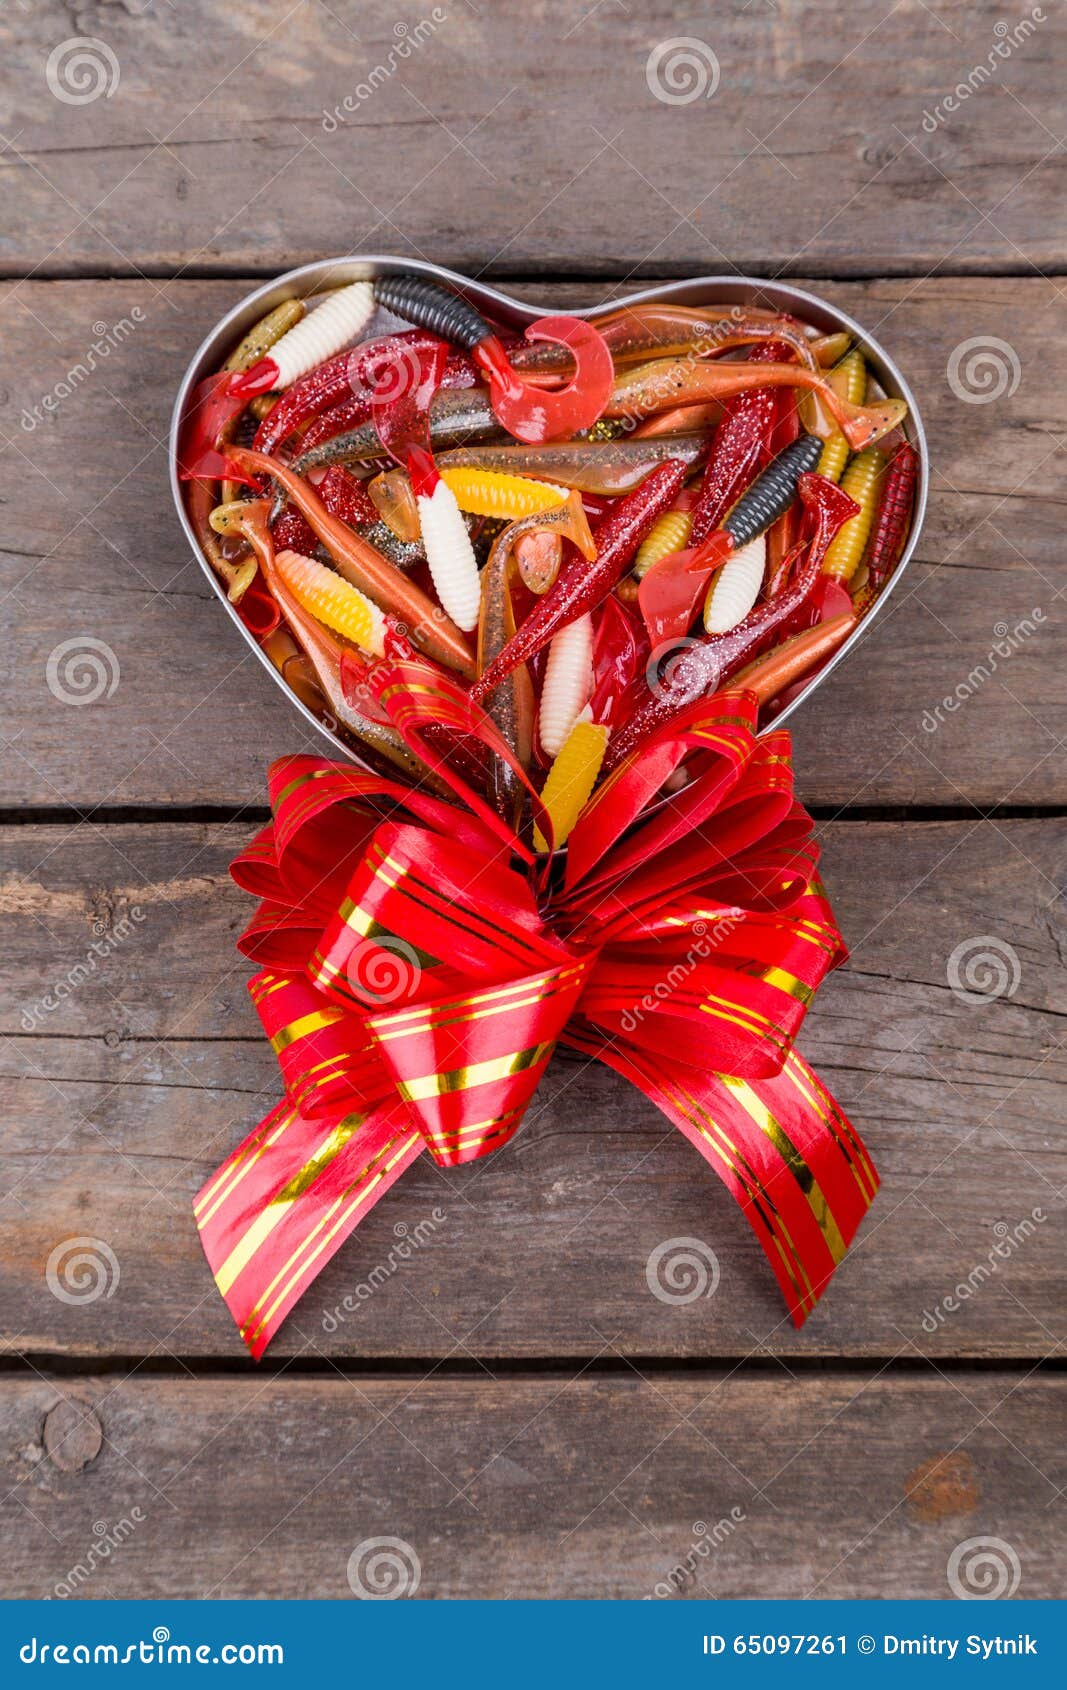 Fishing Softbaits in Gift Box for Valentines Day Stock Image - Image of  accessories, heart: 65097261